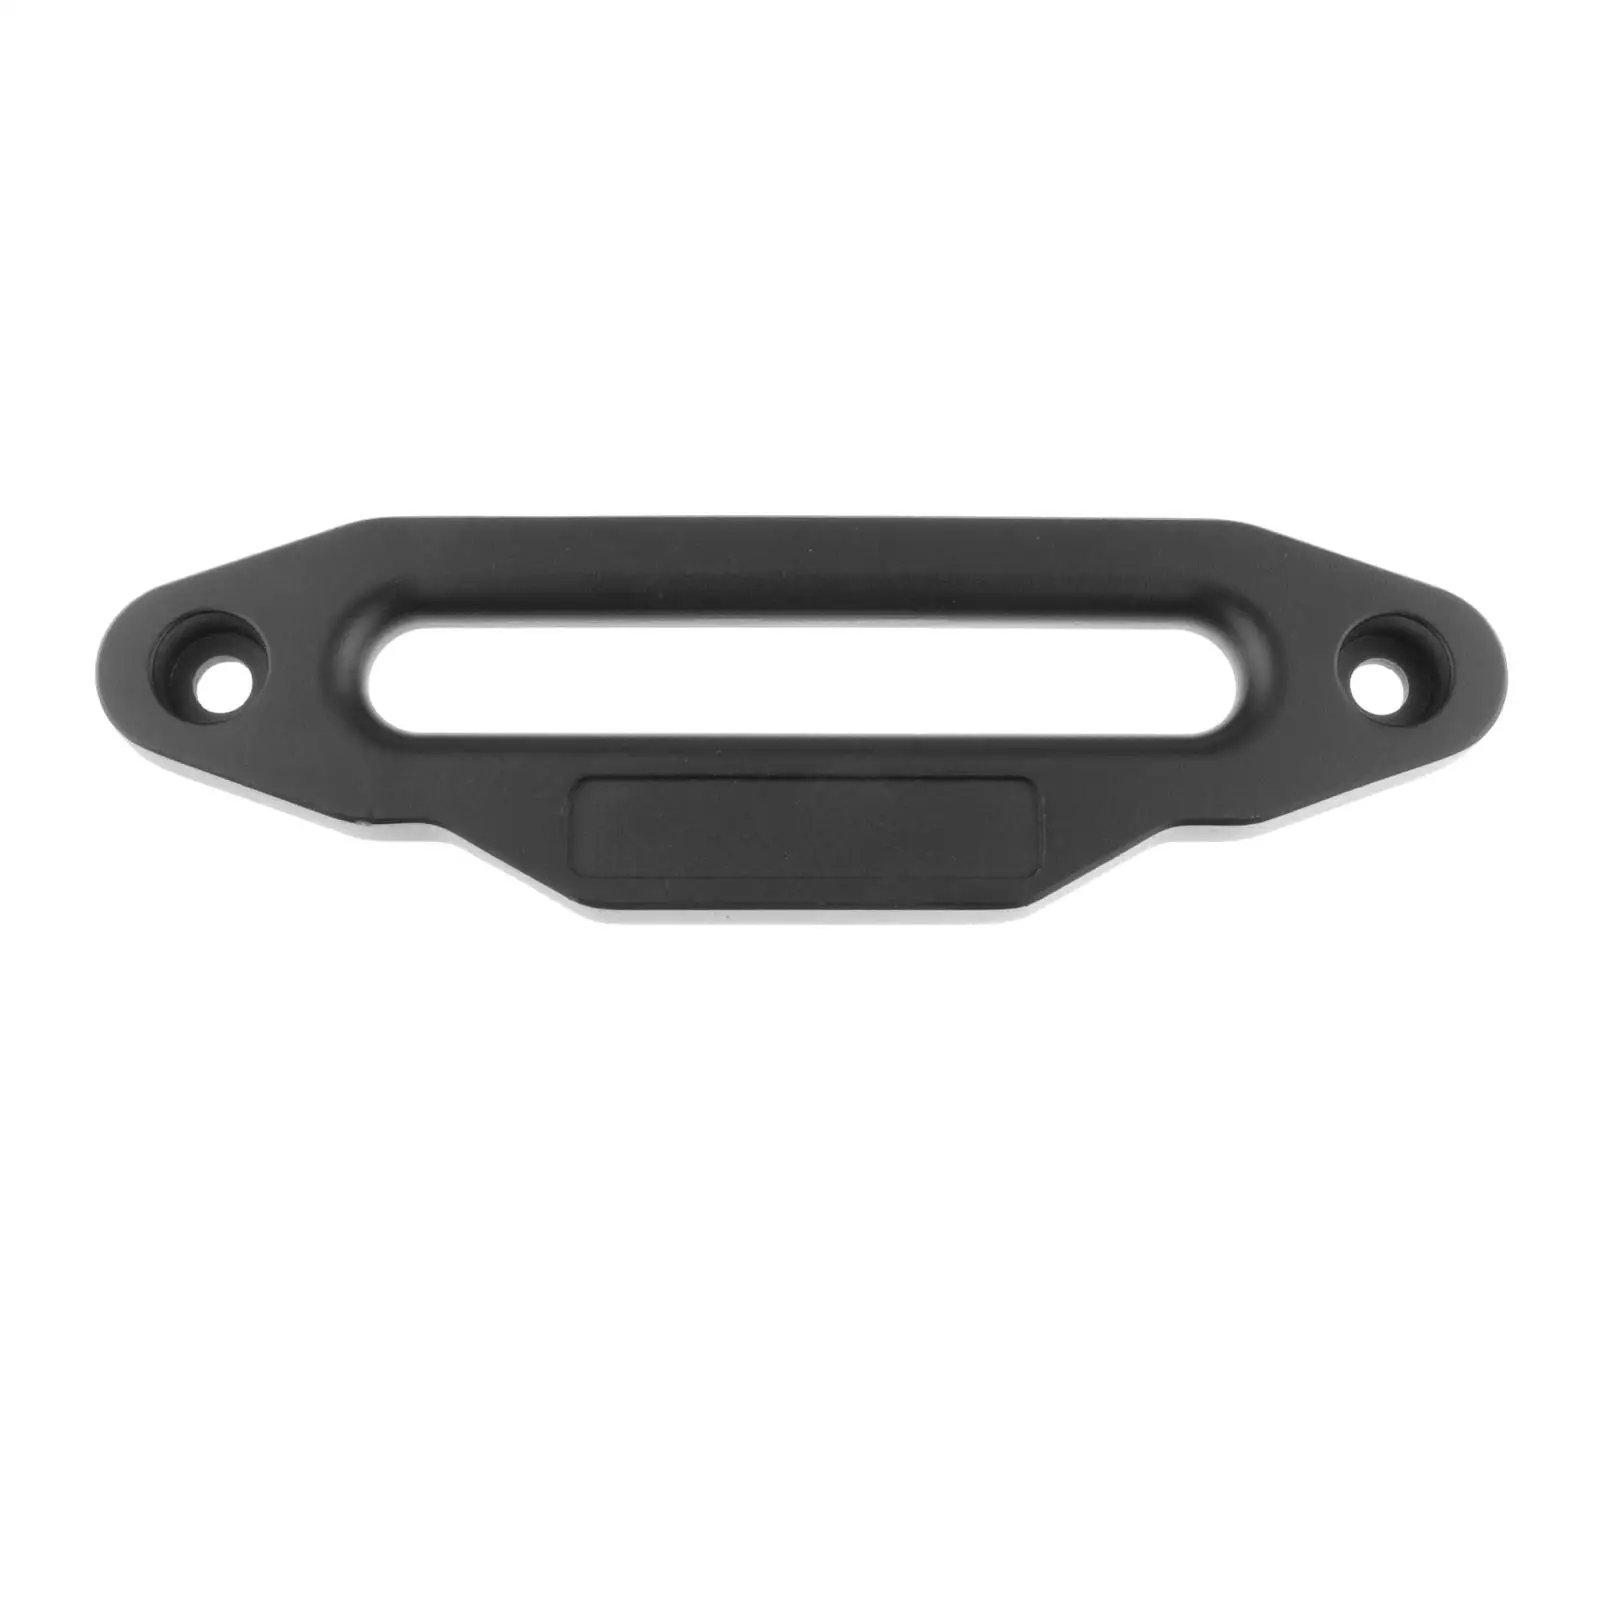 Black Aluminium 254mm Hawse Fair for Winch Rope  ATV UTV 8000-12000lbs, Reduces binding and friction caused by angled pulls